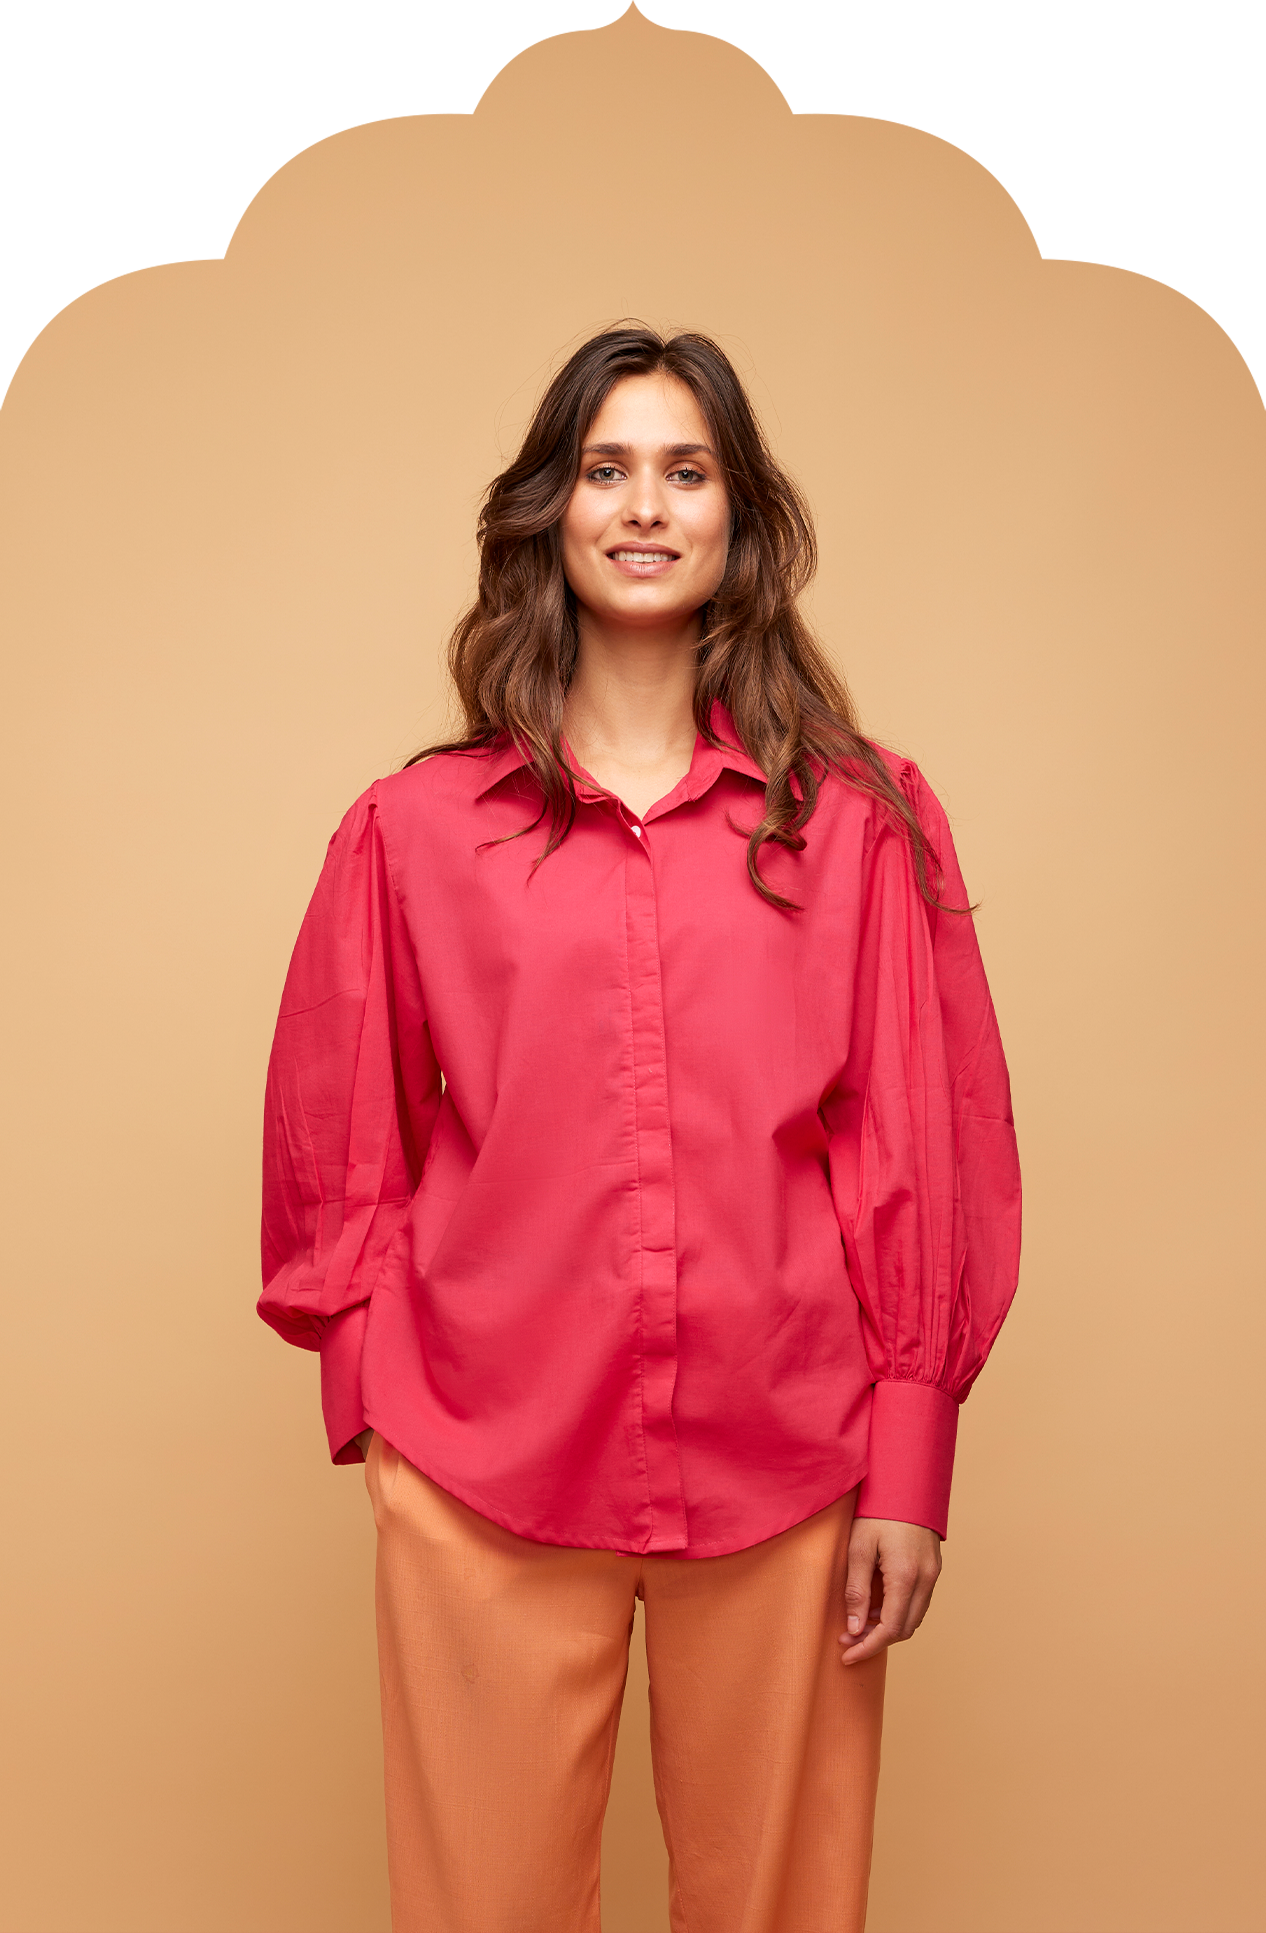 Women's Pink Shirt with Balloon sleeves